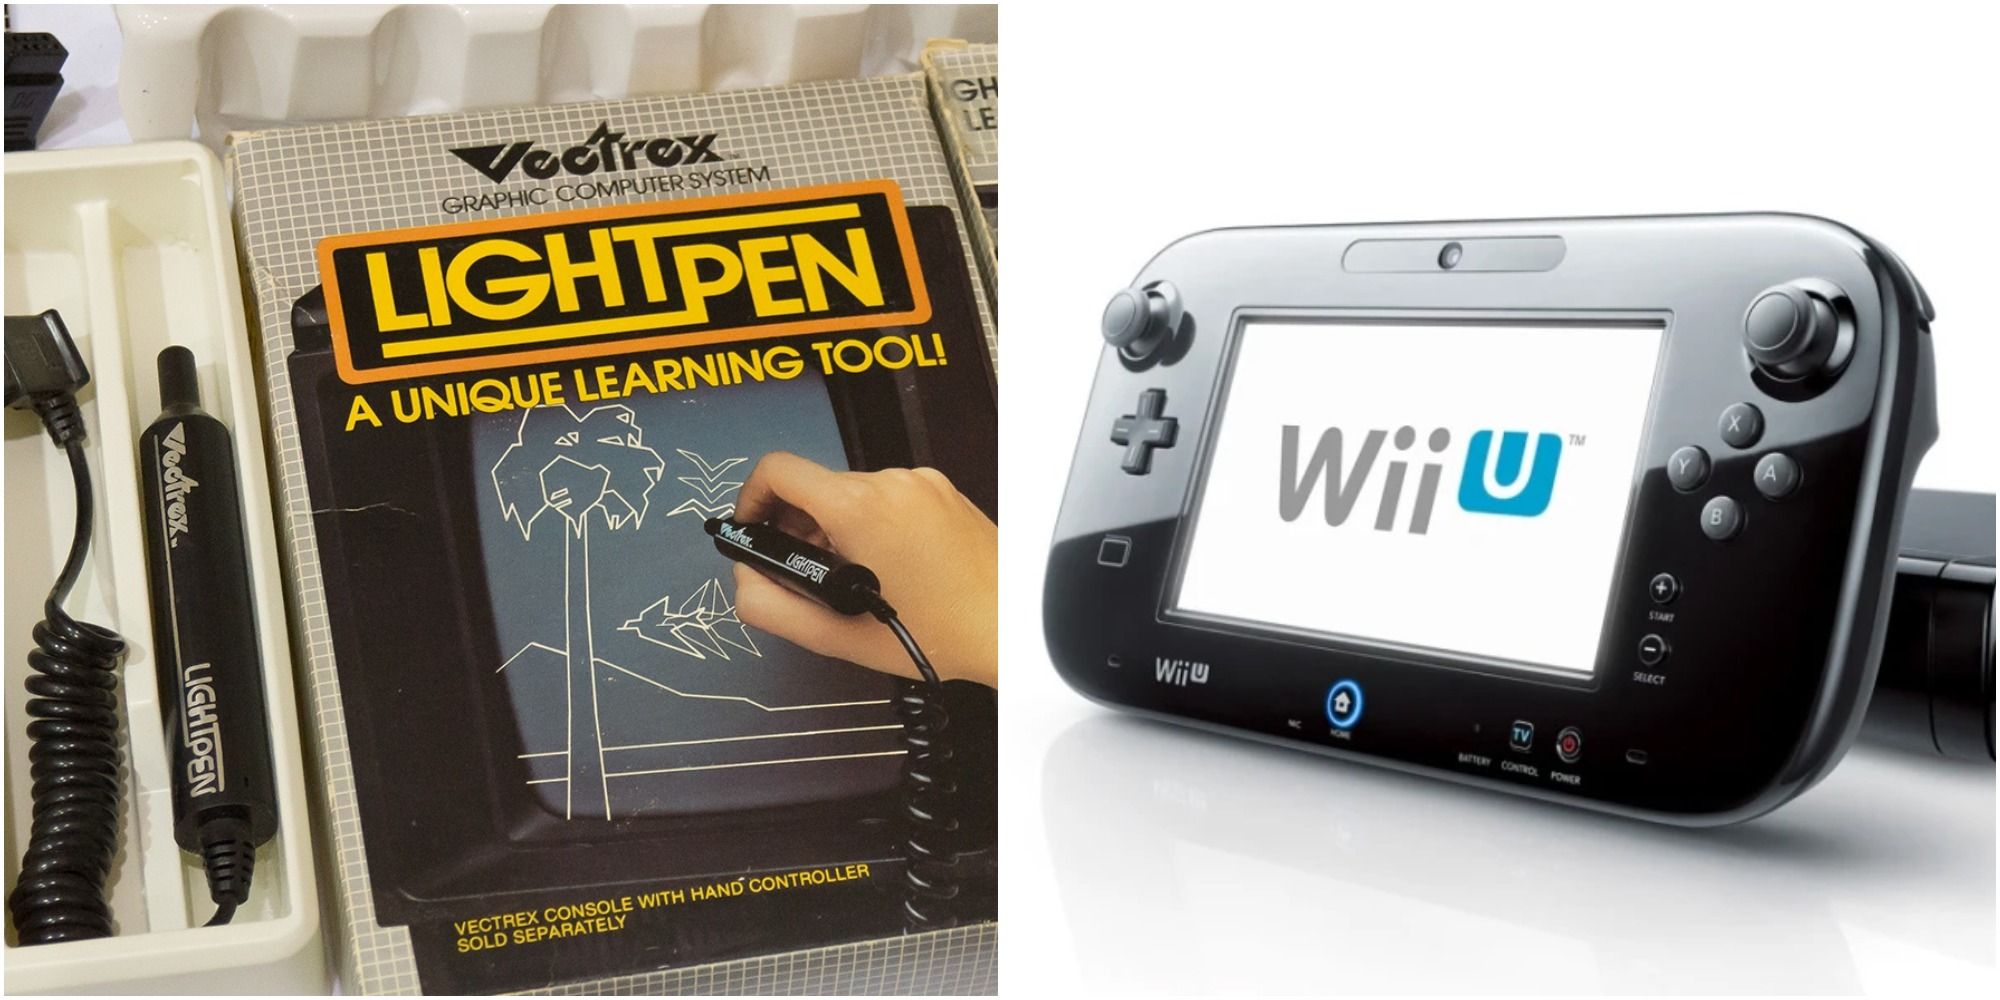 A collage showing the light pen peripheral for the Vectrex Gaming Console and the Nintendo Wii U